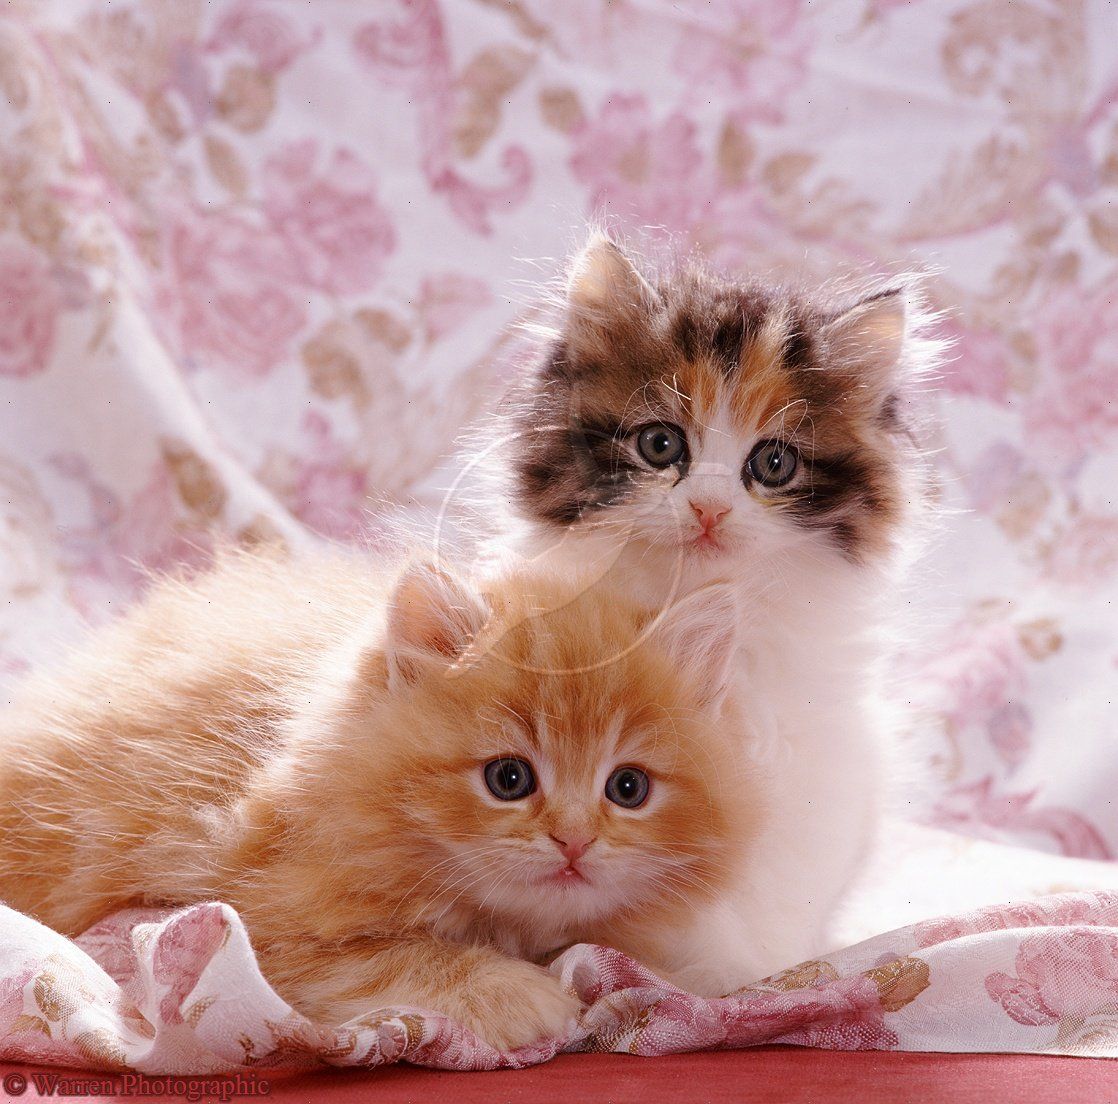 Cute Cats And Dogs Wallpapers Wallpapers